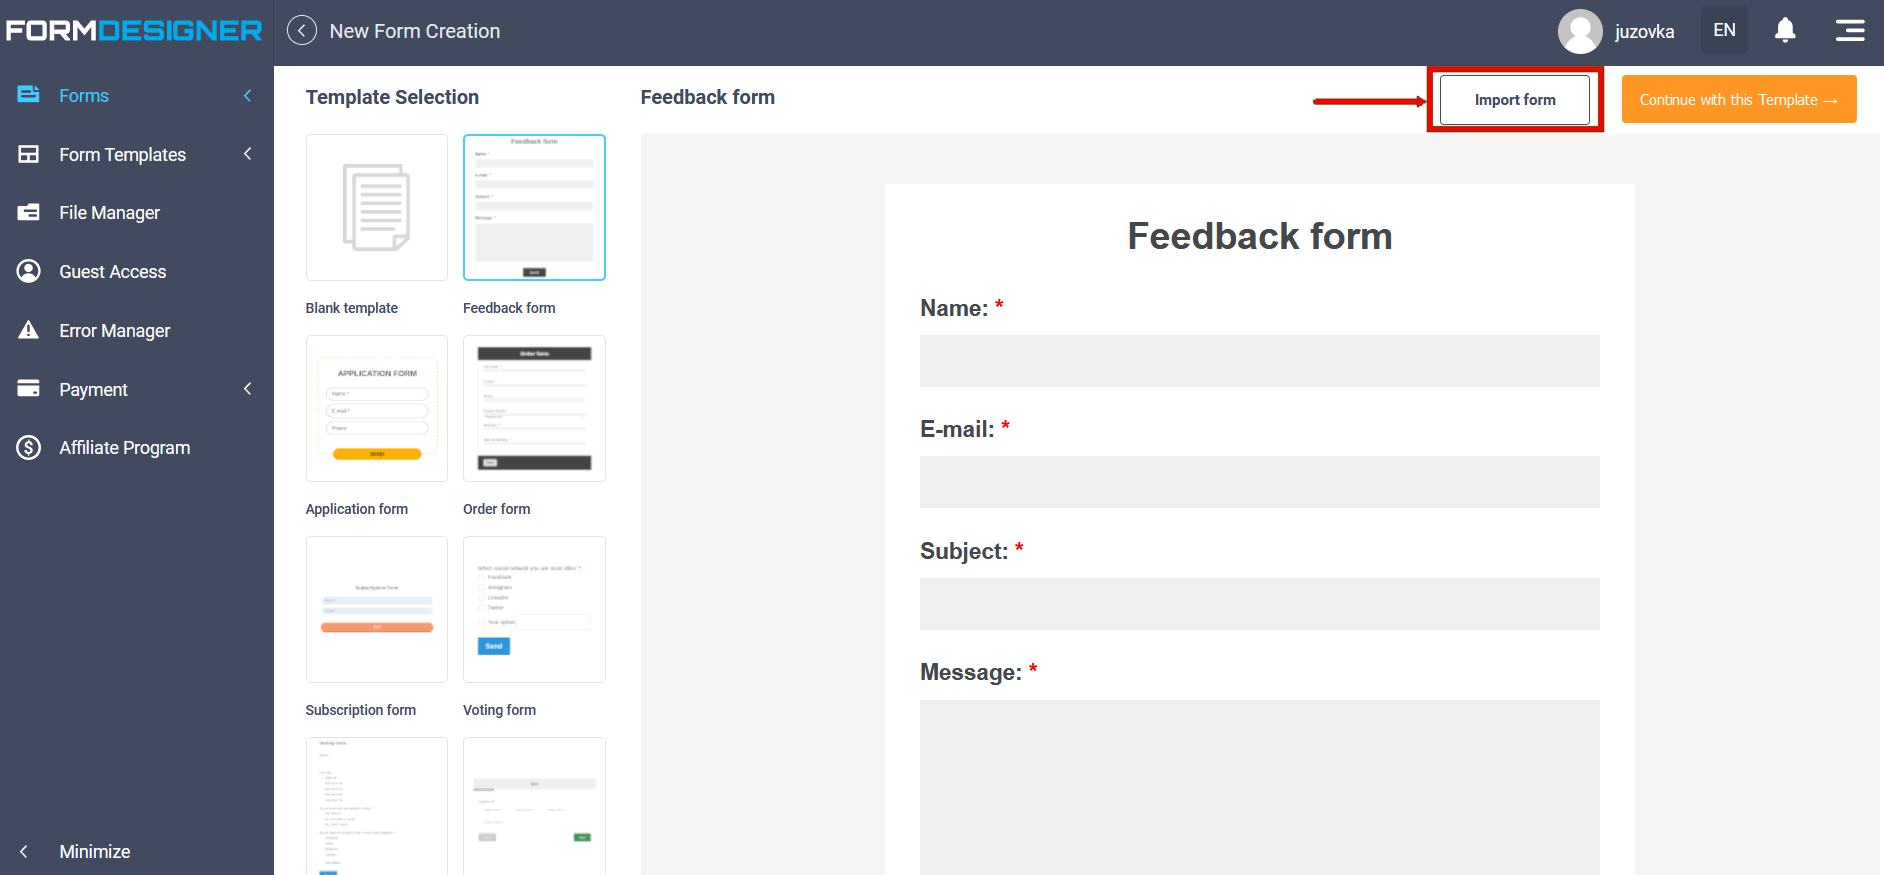 Importing forms from 123FormBuilder to FormDesigner 1